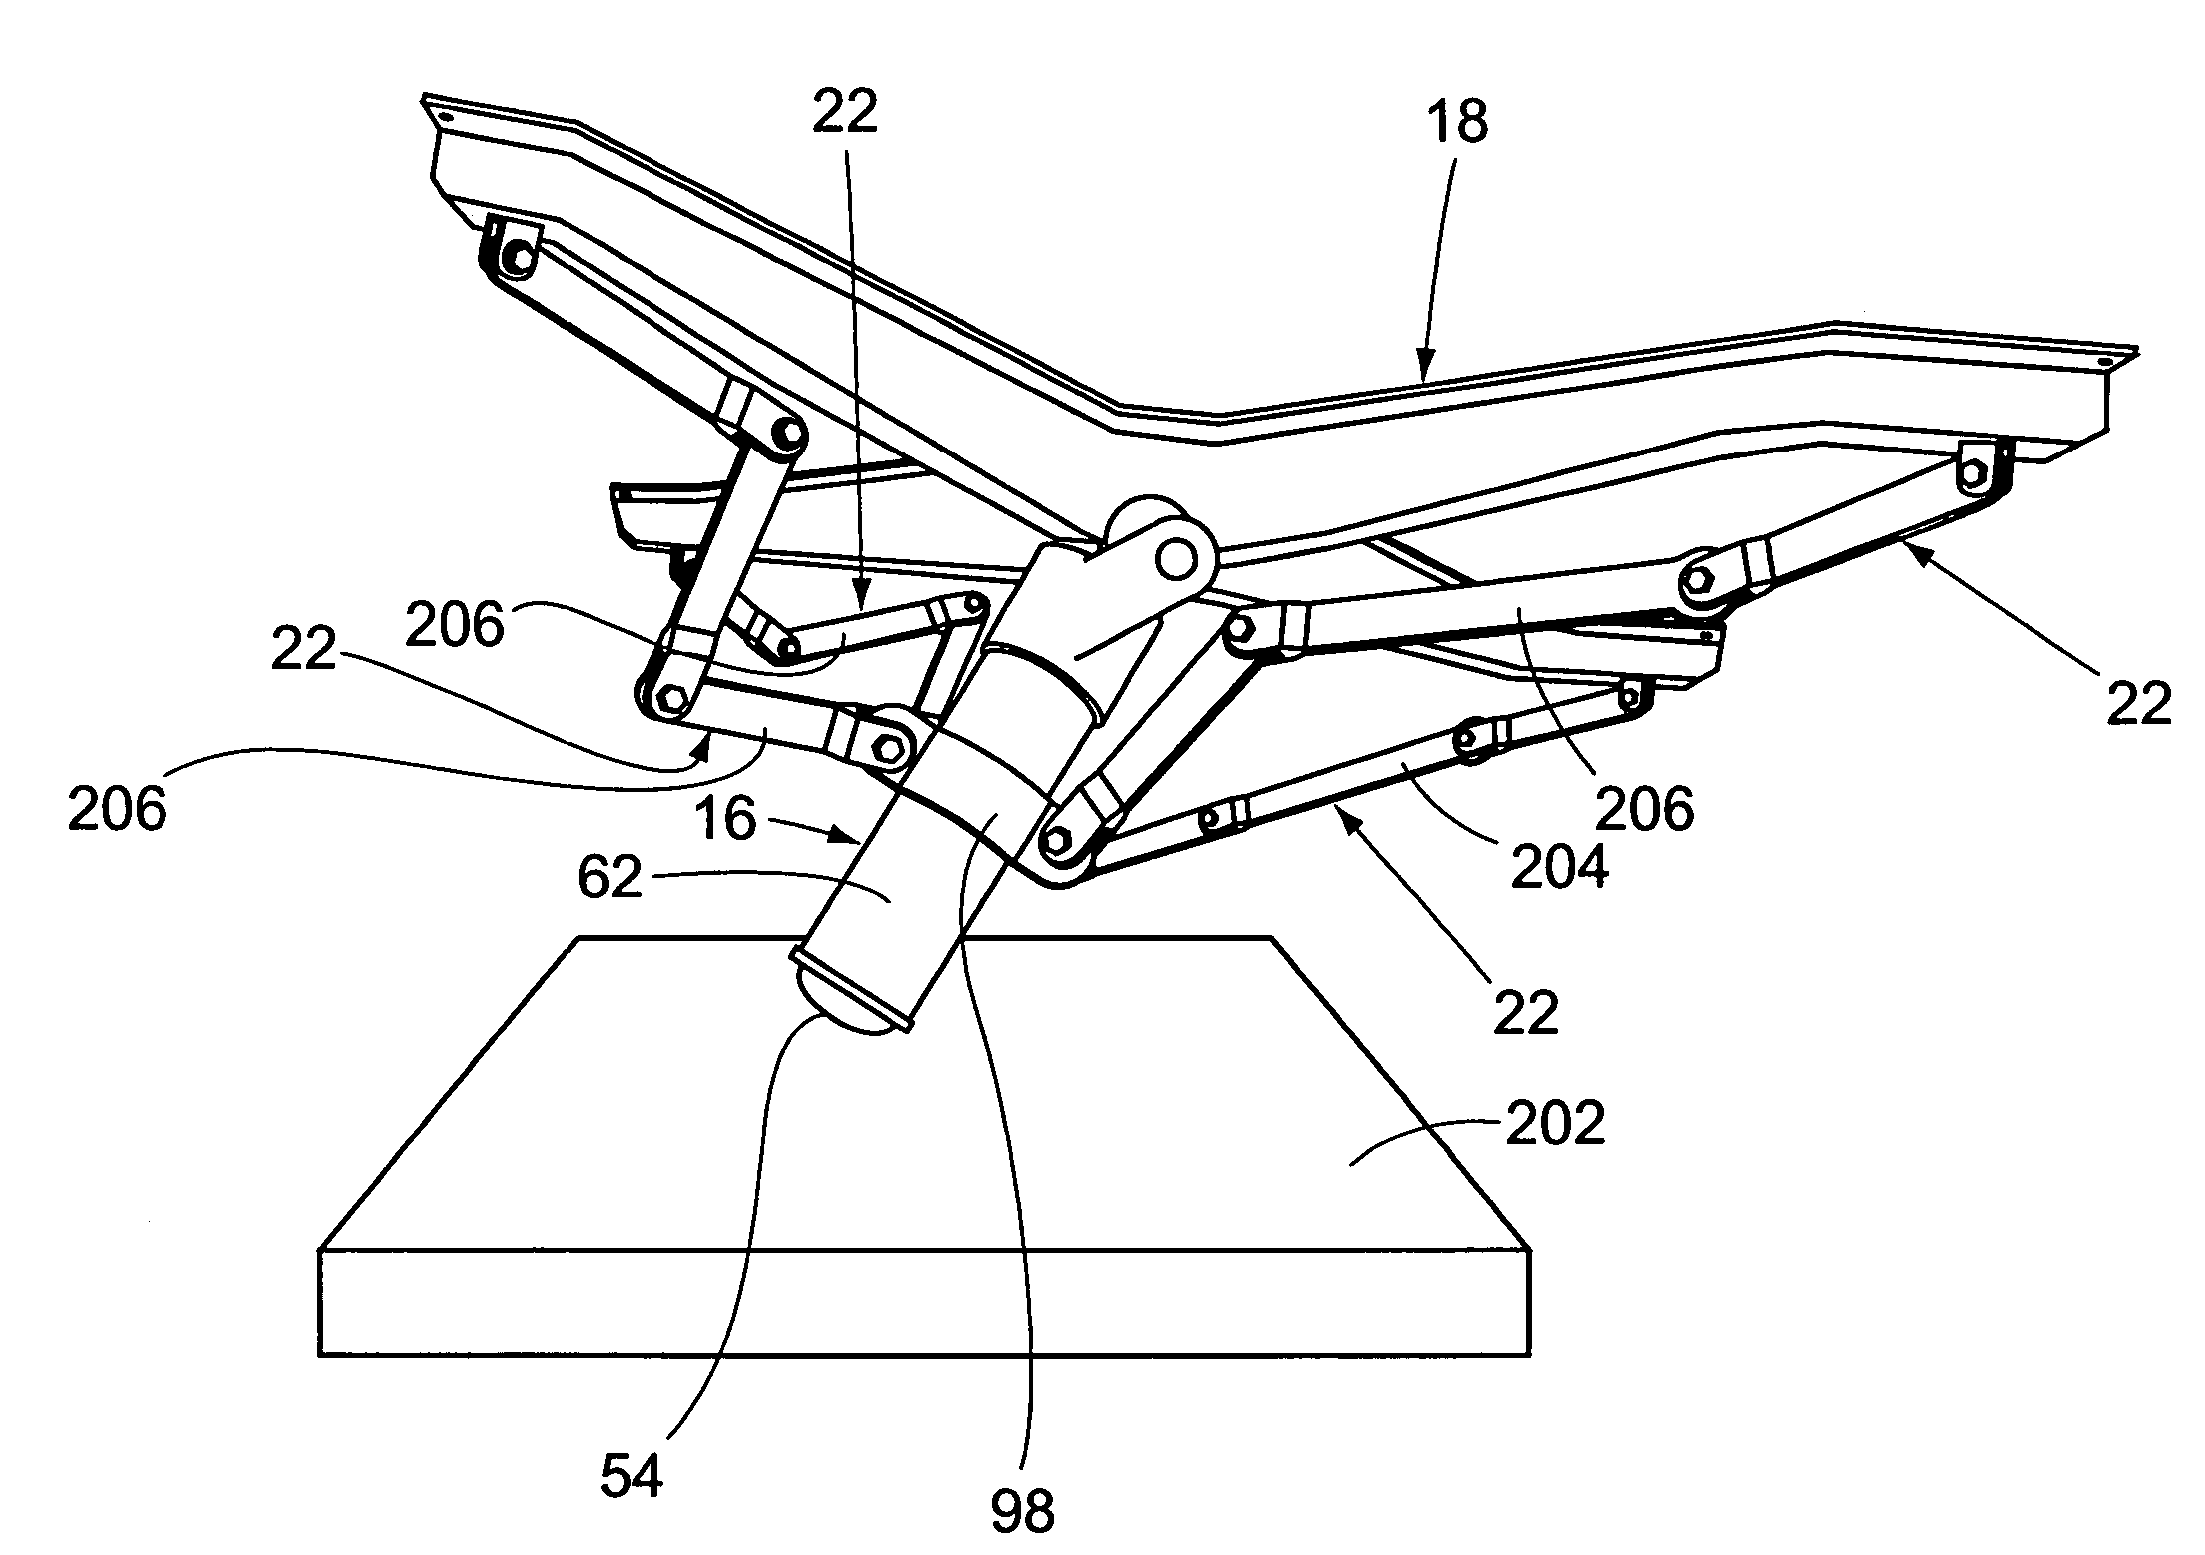 Landing assist probe mounting system